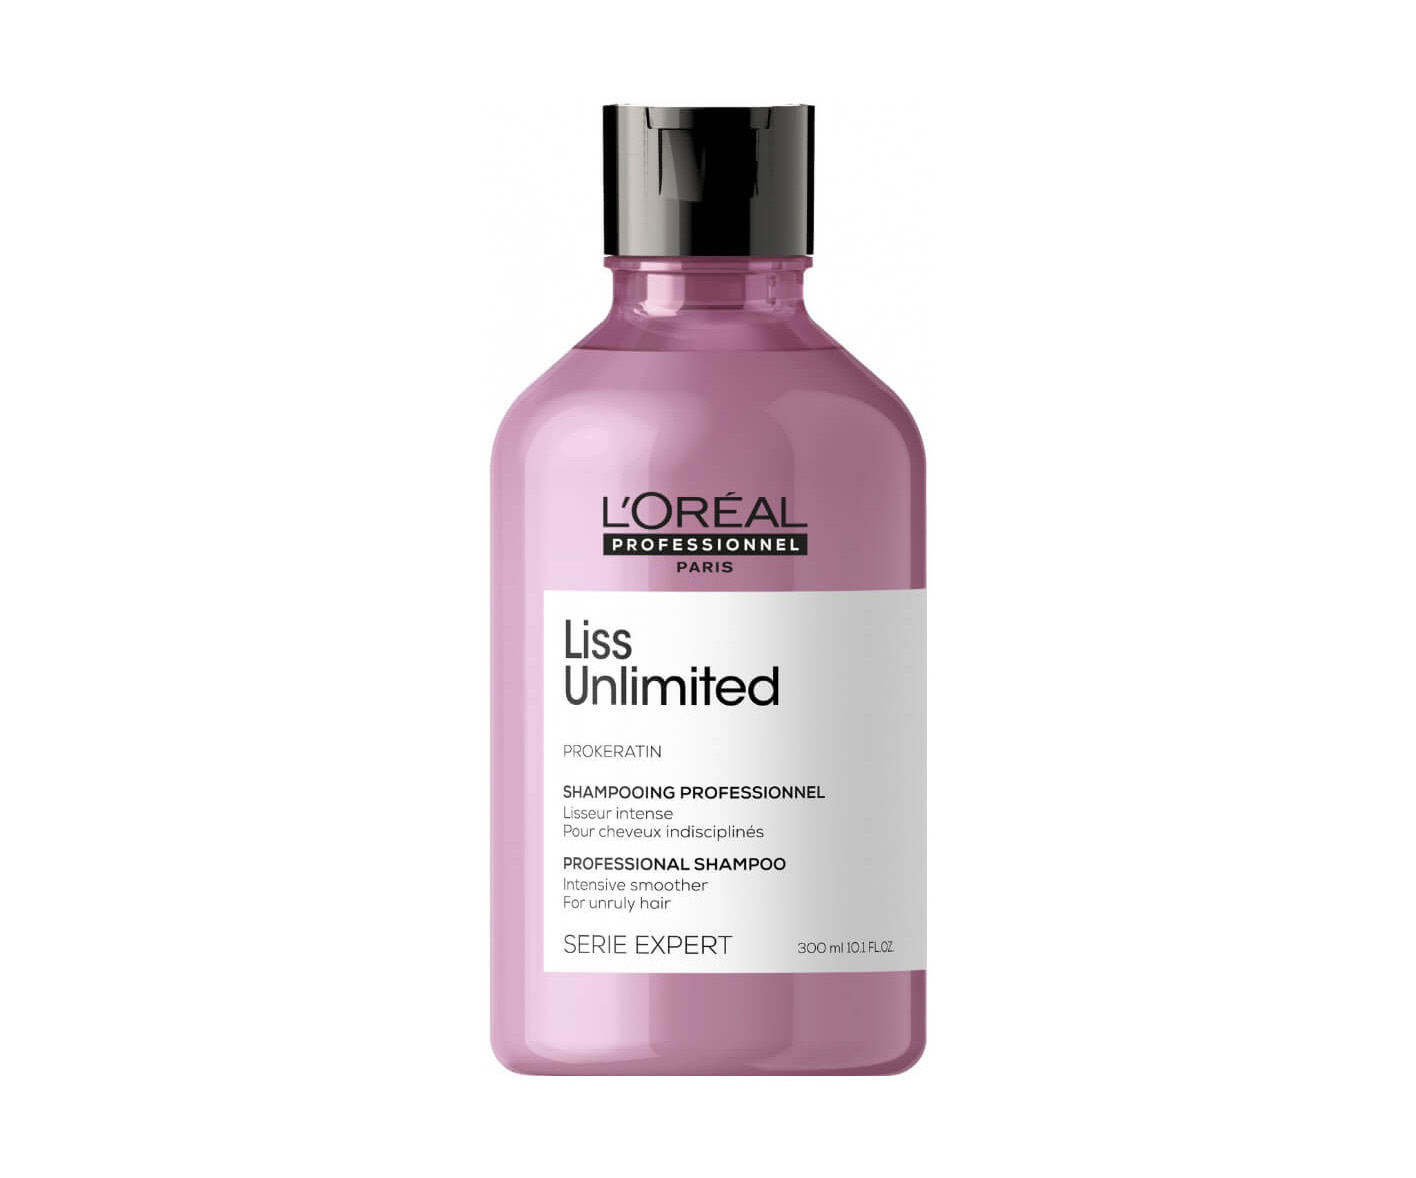 L'Oréal Professionnel Liss Unlimited, shampoo for frizzy hair